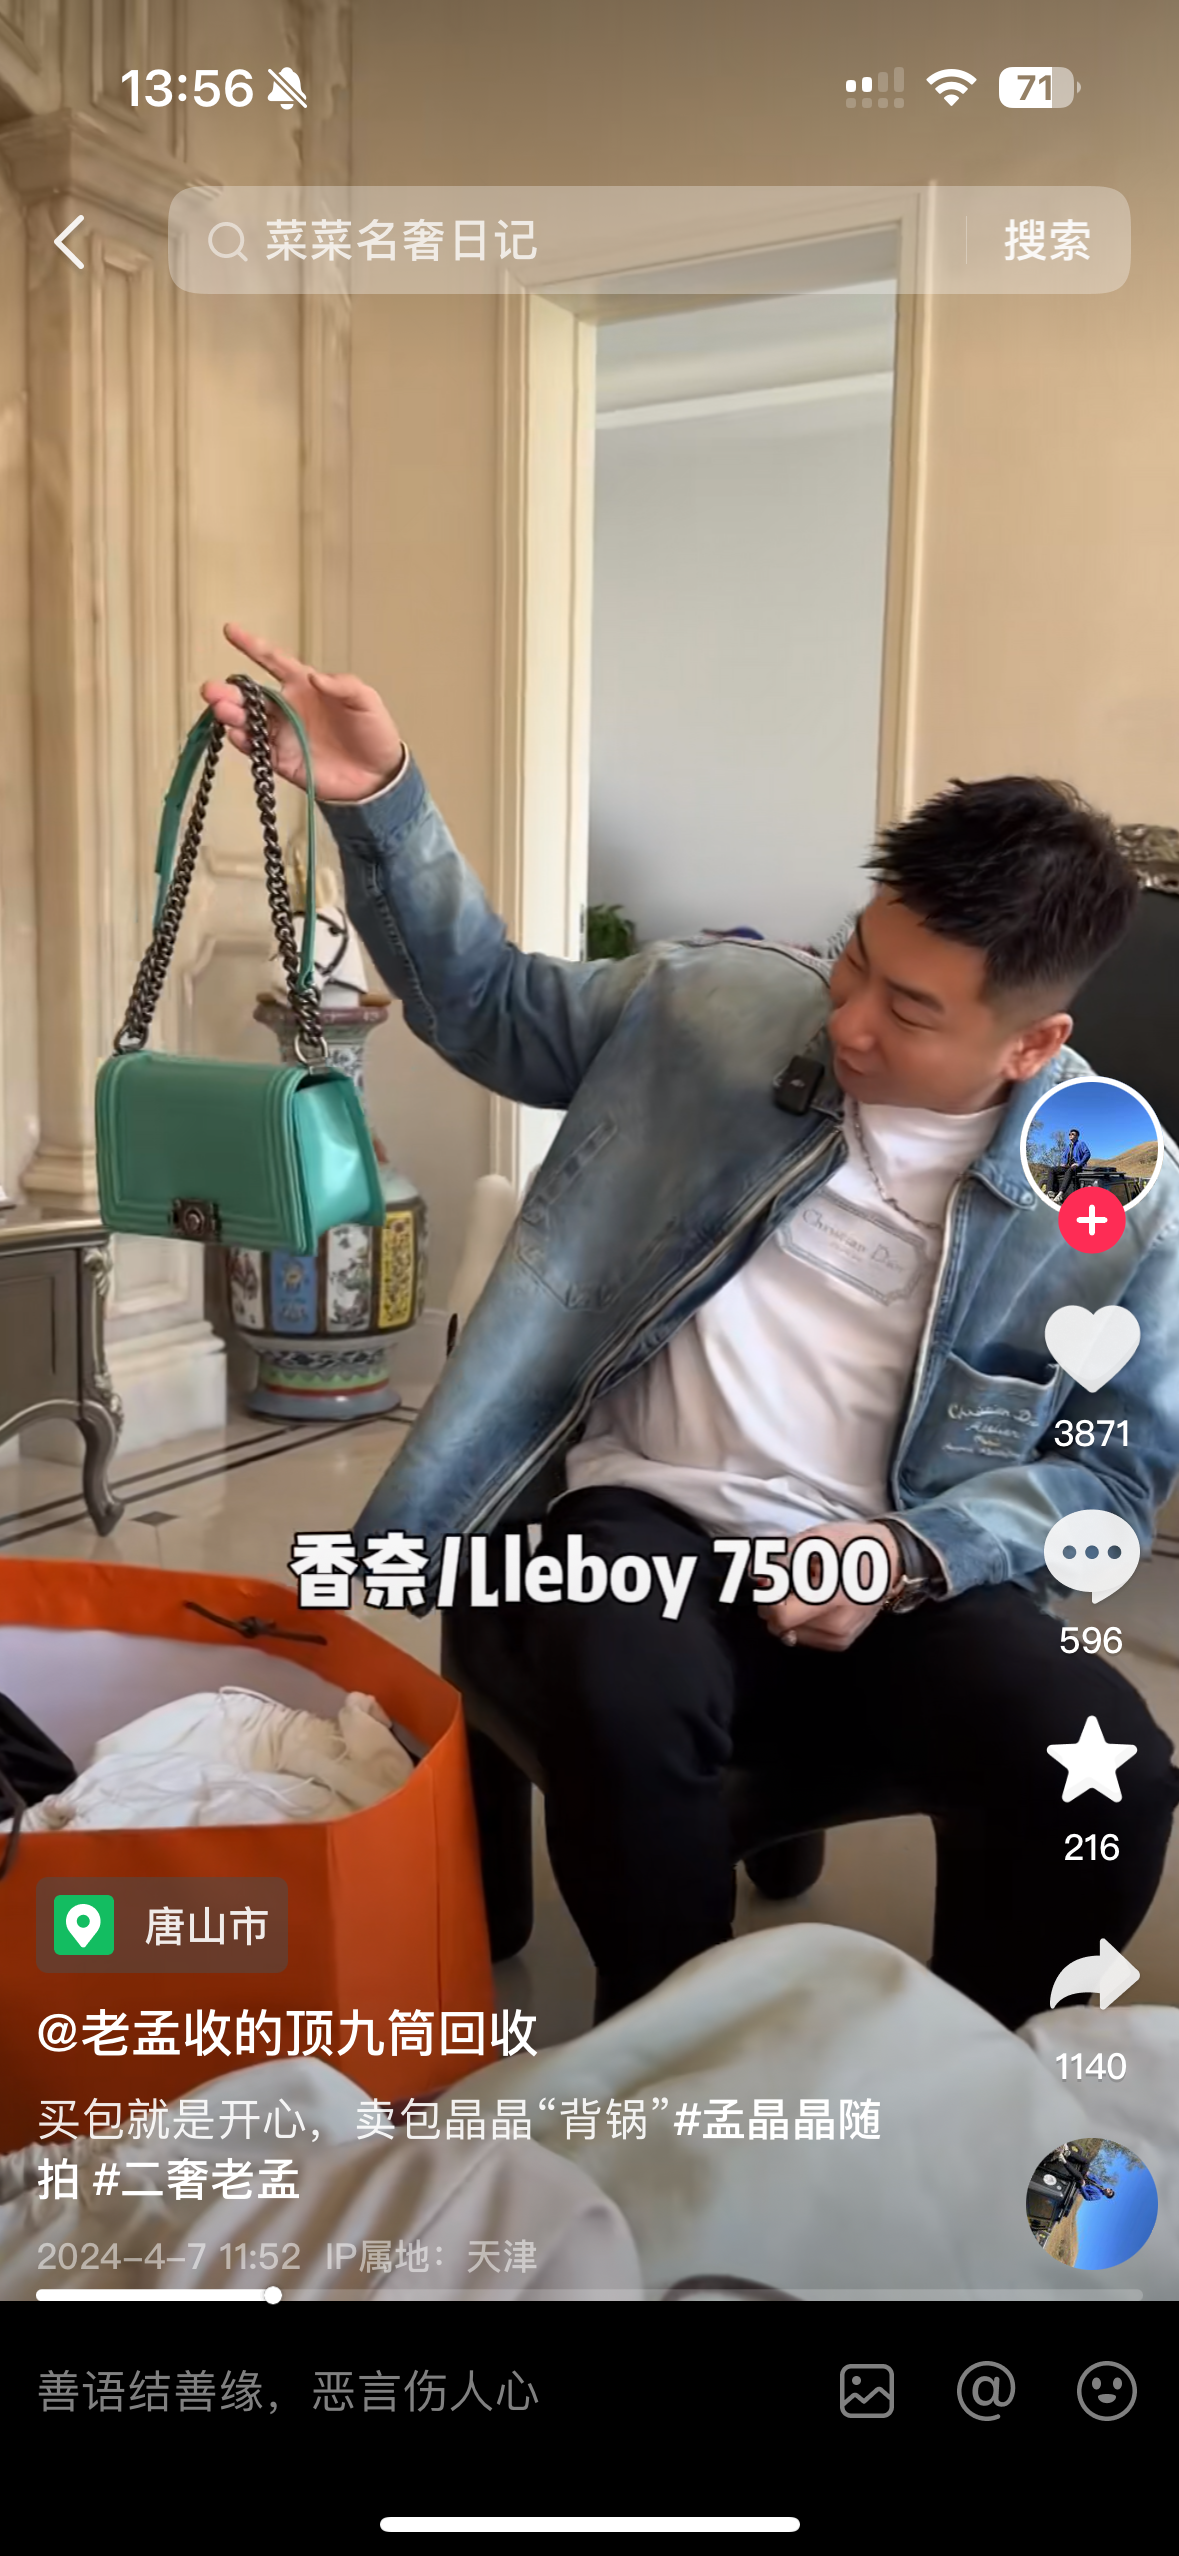 Second hand reseller coming to consumers’ doors upon shoppers request to sell and recycle luxury handbags. Image: Douyin screenshot